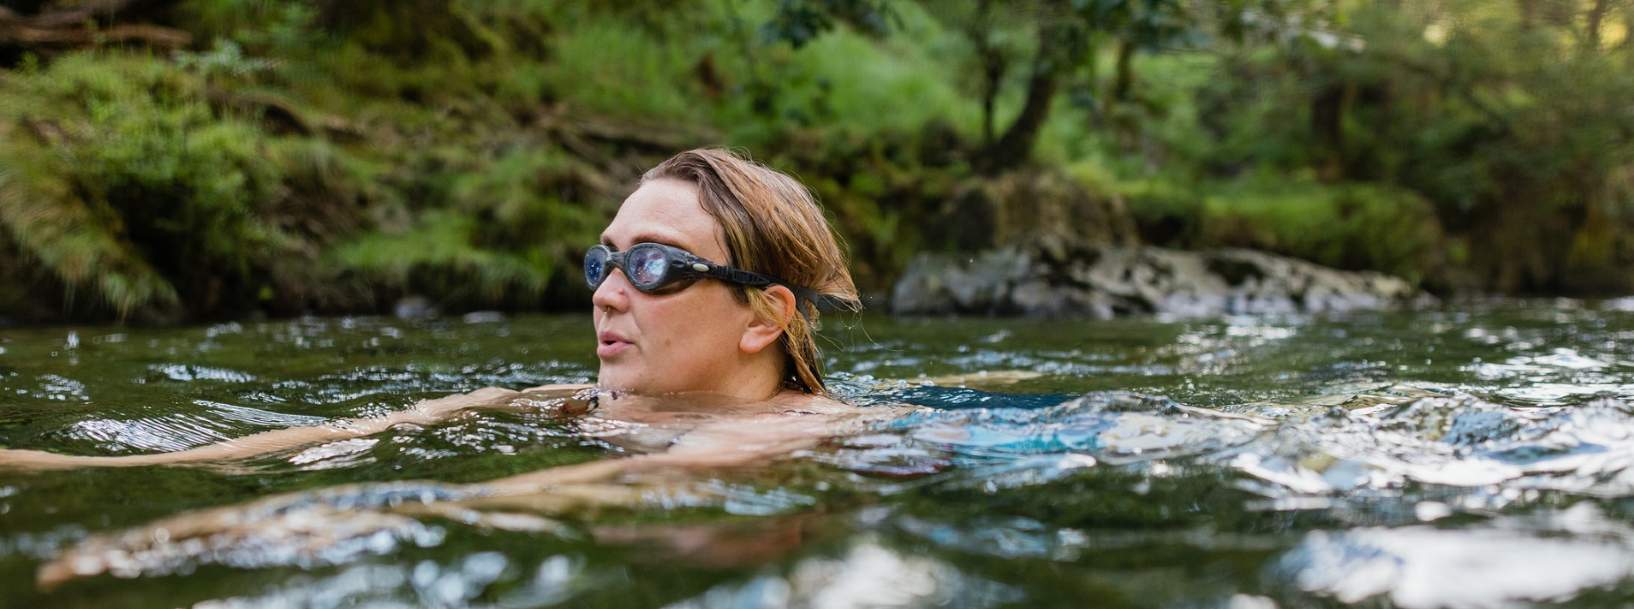 Diving into the wild: why landowners are going with the flow of wild swimming